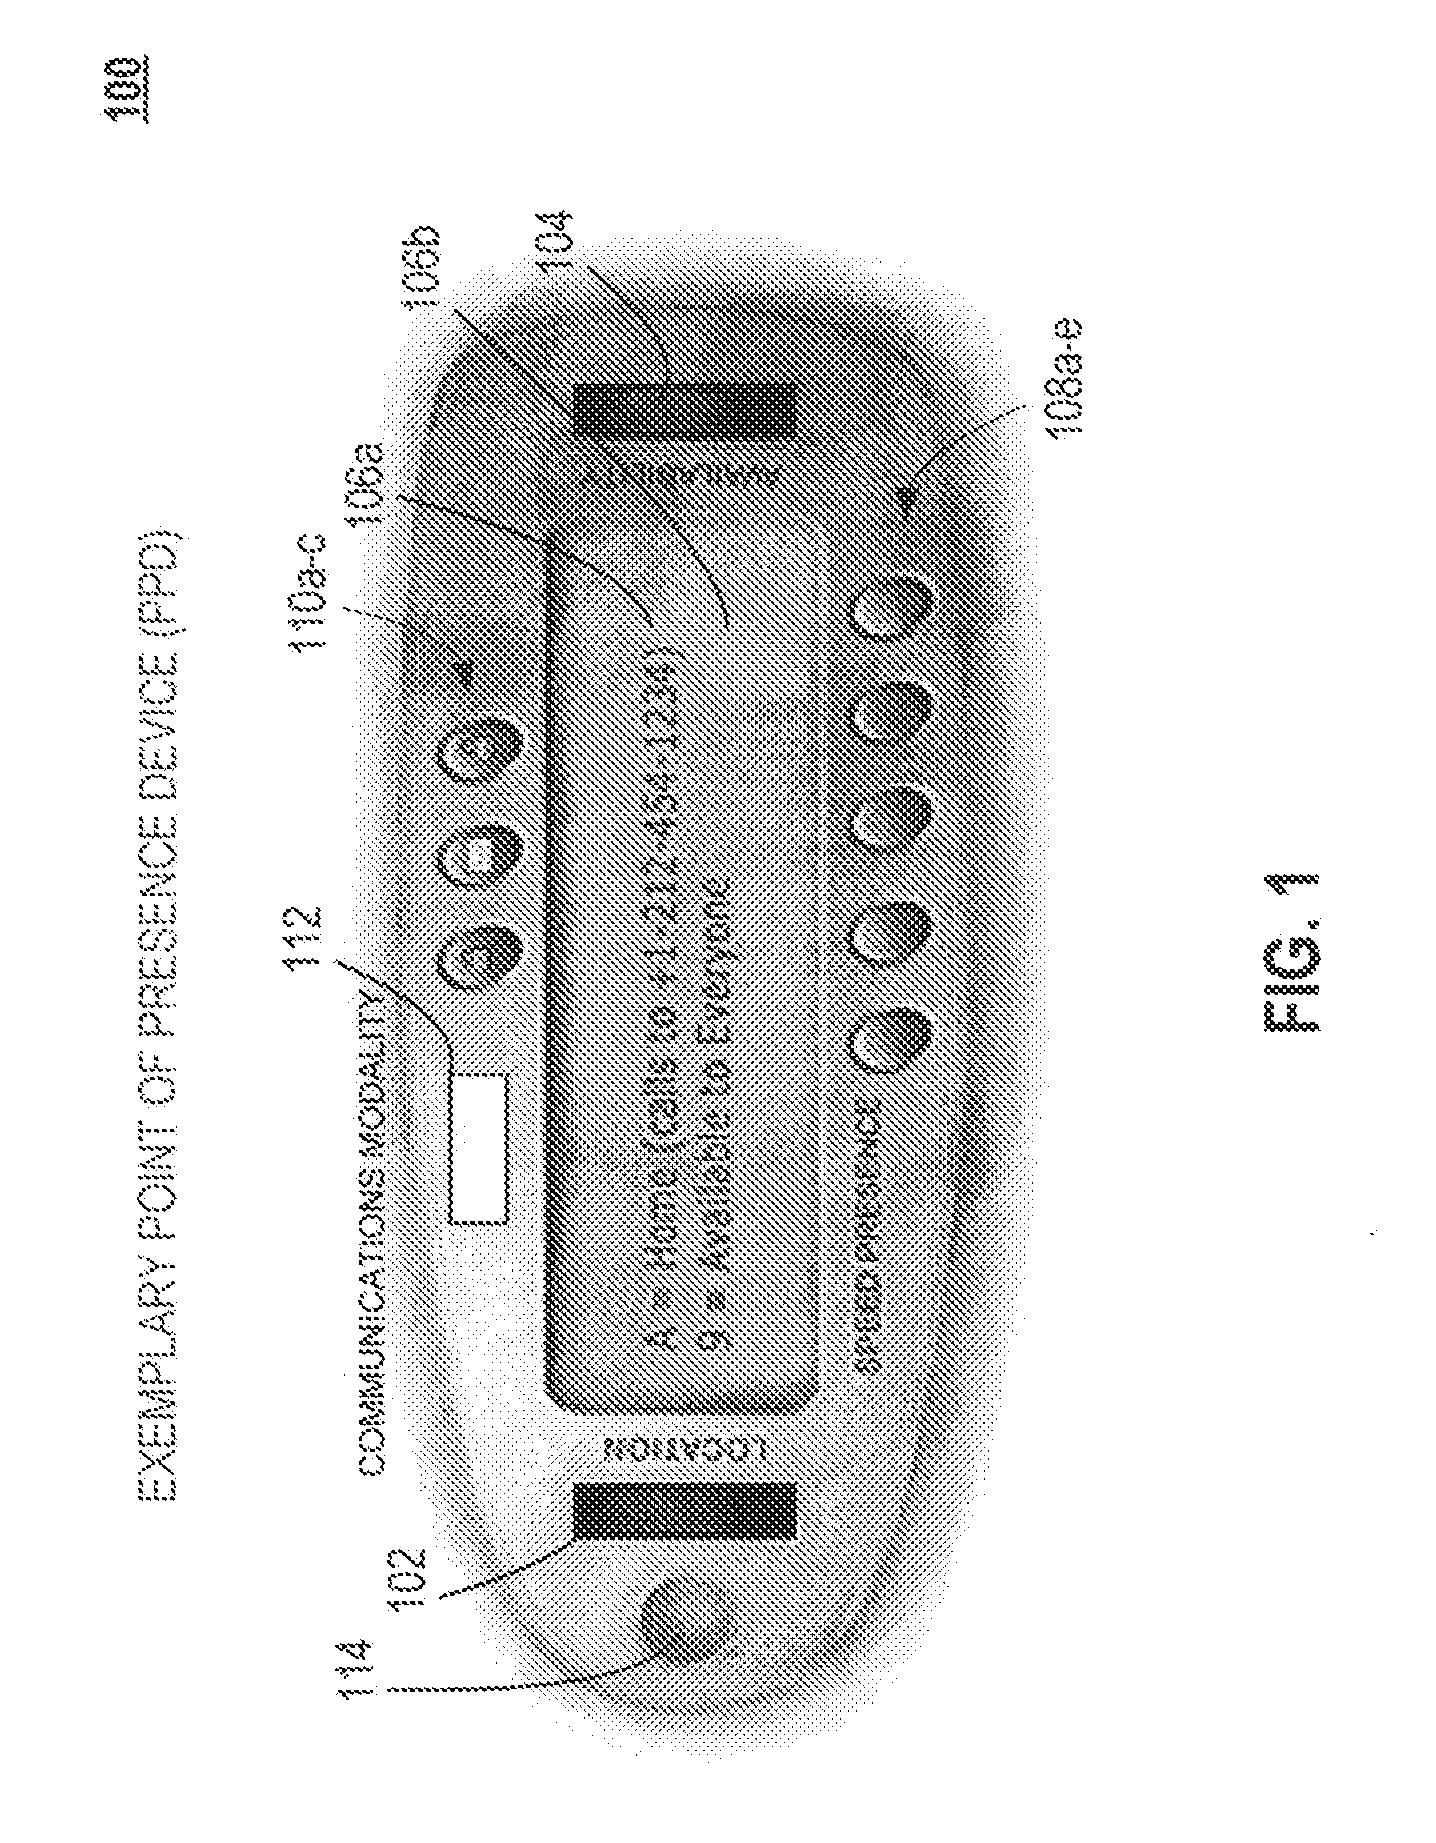 System, Method and Portable Communication Device